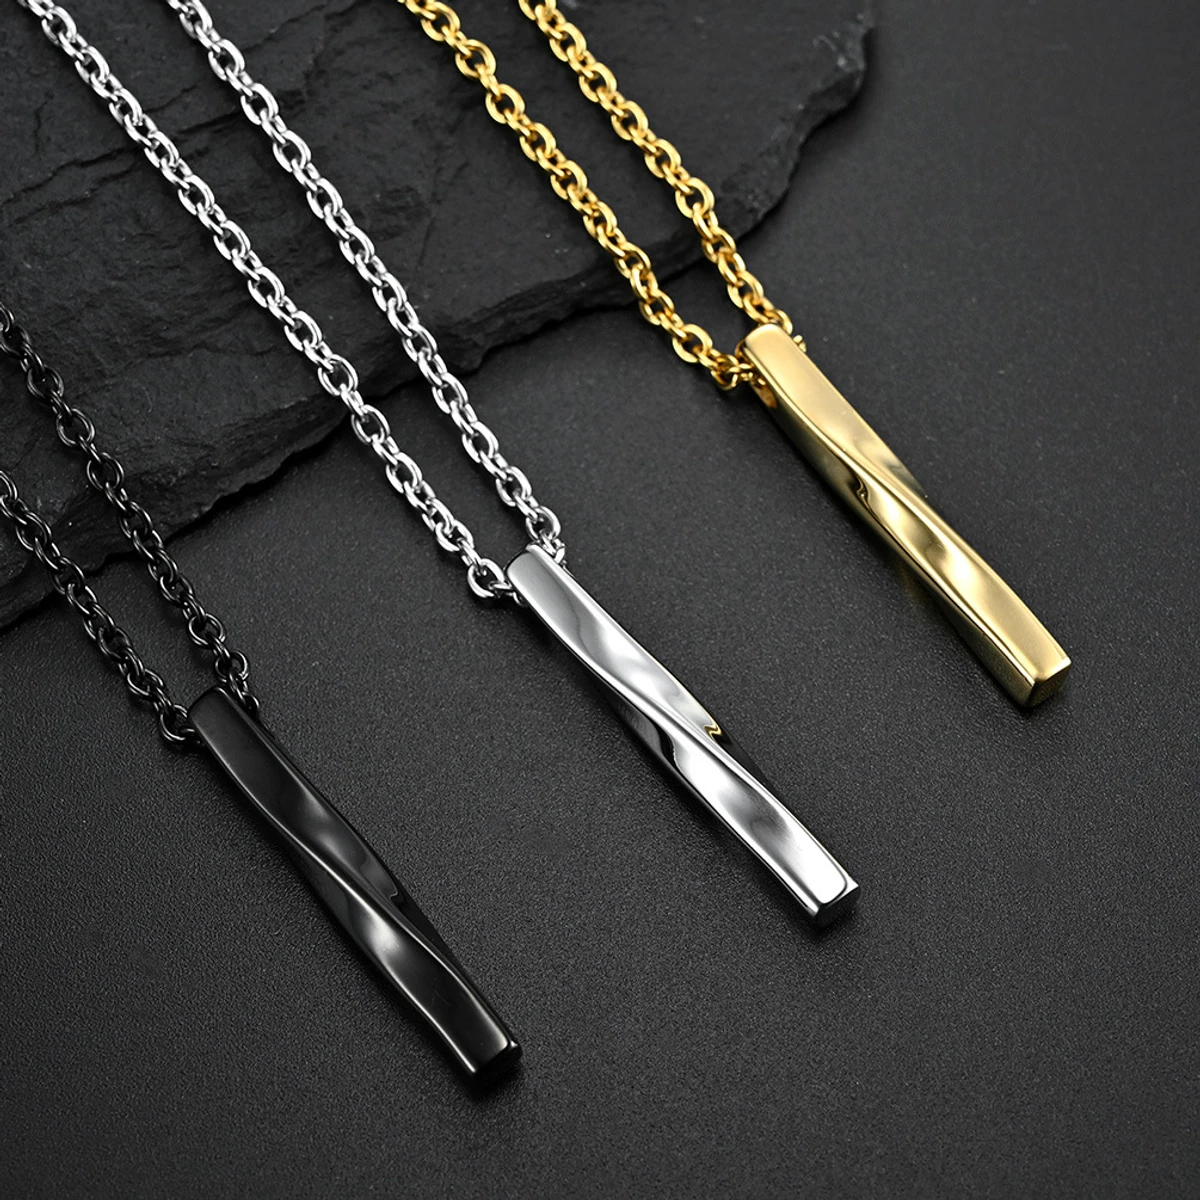 Style Accessories Men's Accessories Rectangle Necklaces Fashion Jewelry